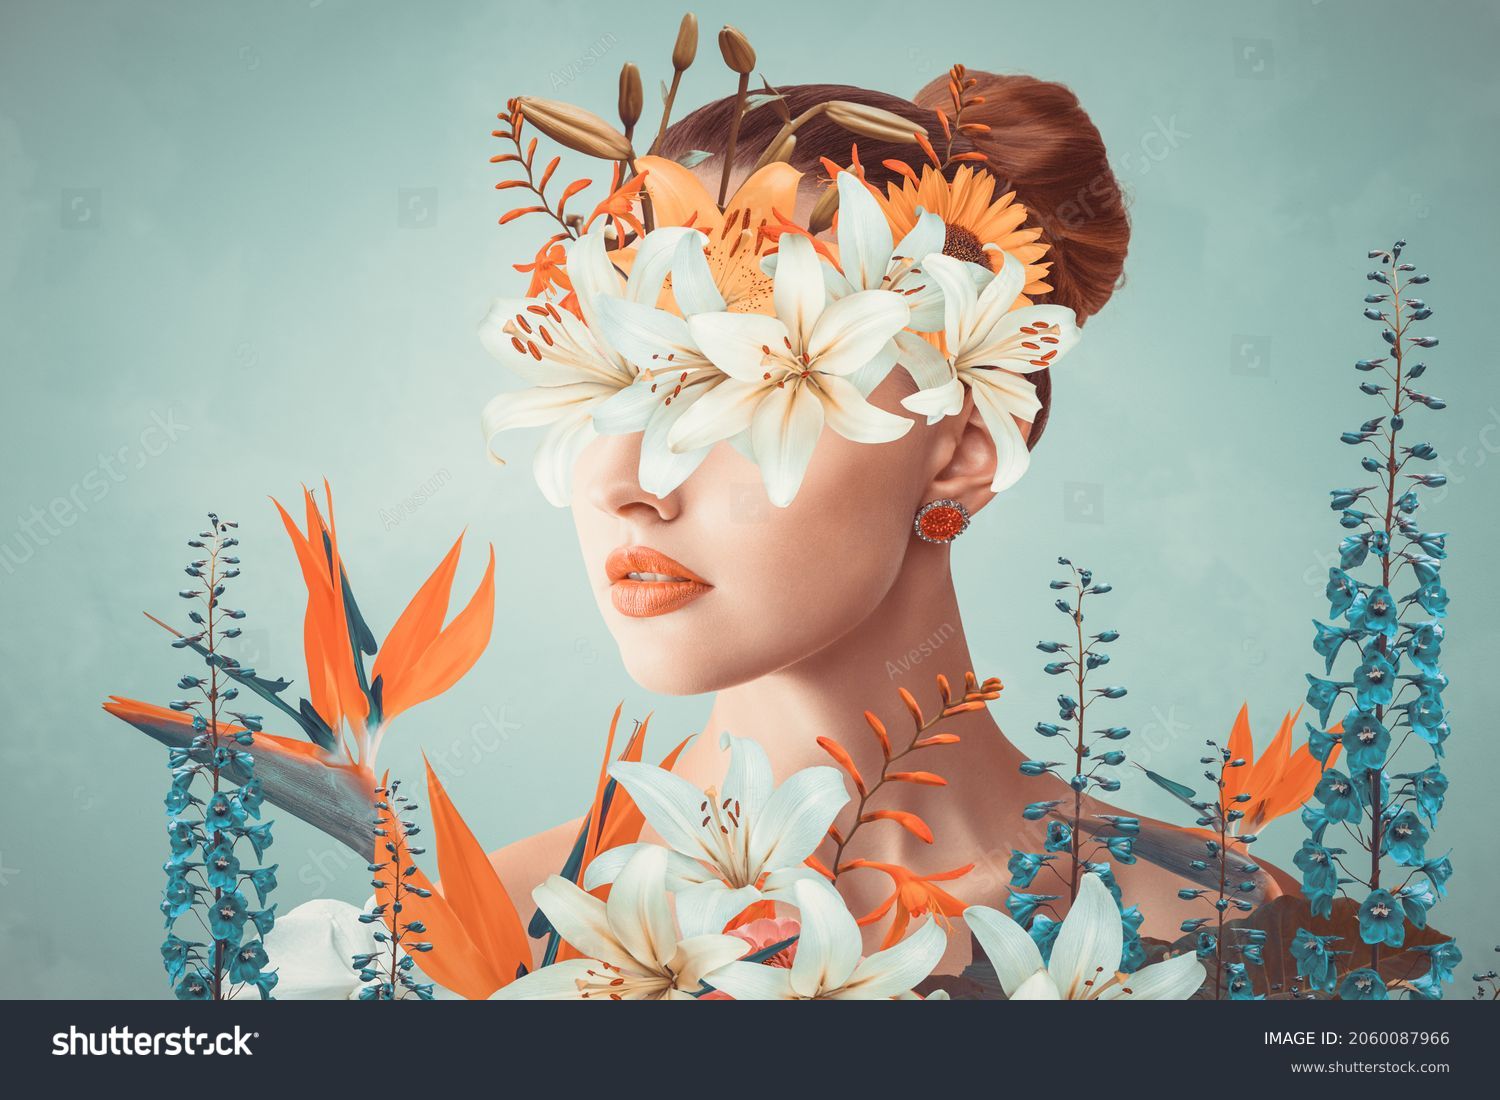 Abstract contemporary art collage portrait of young woman with flowers on face hides her eyes #2060087966